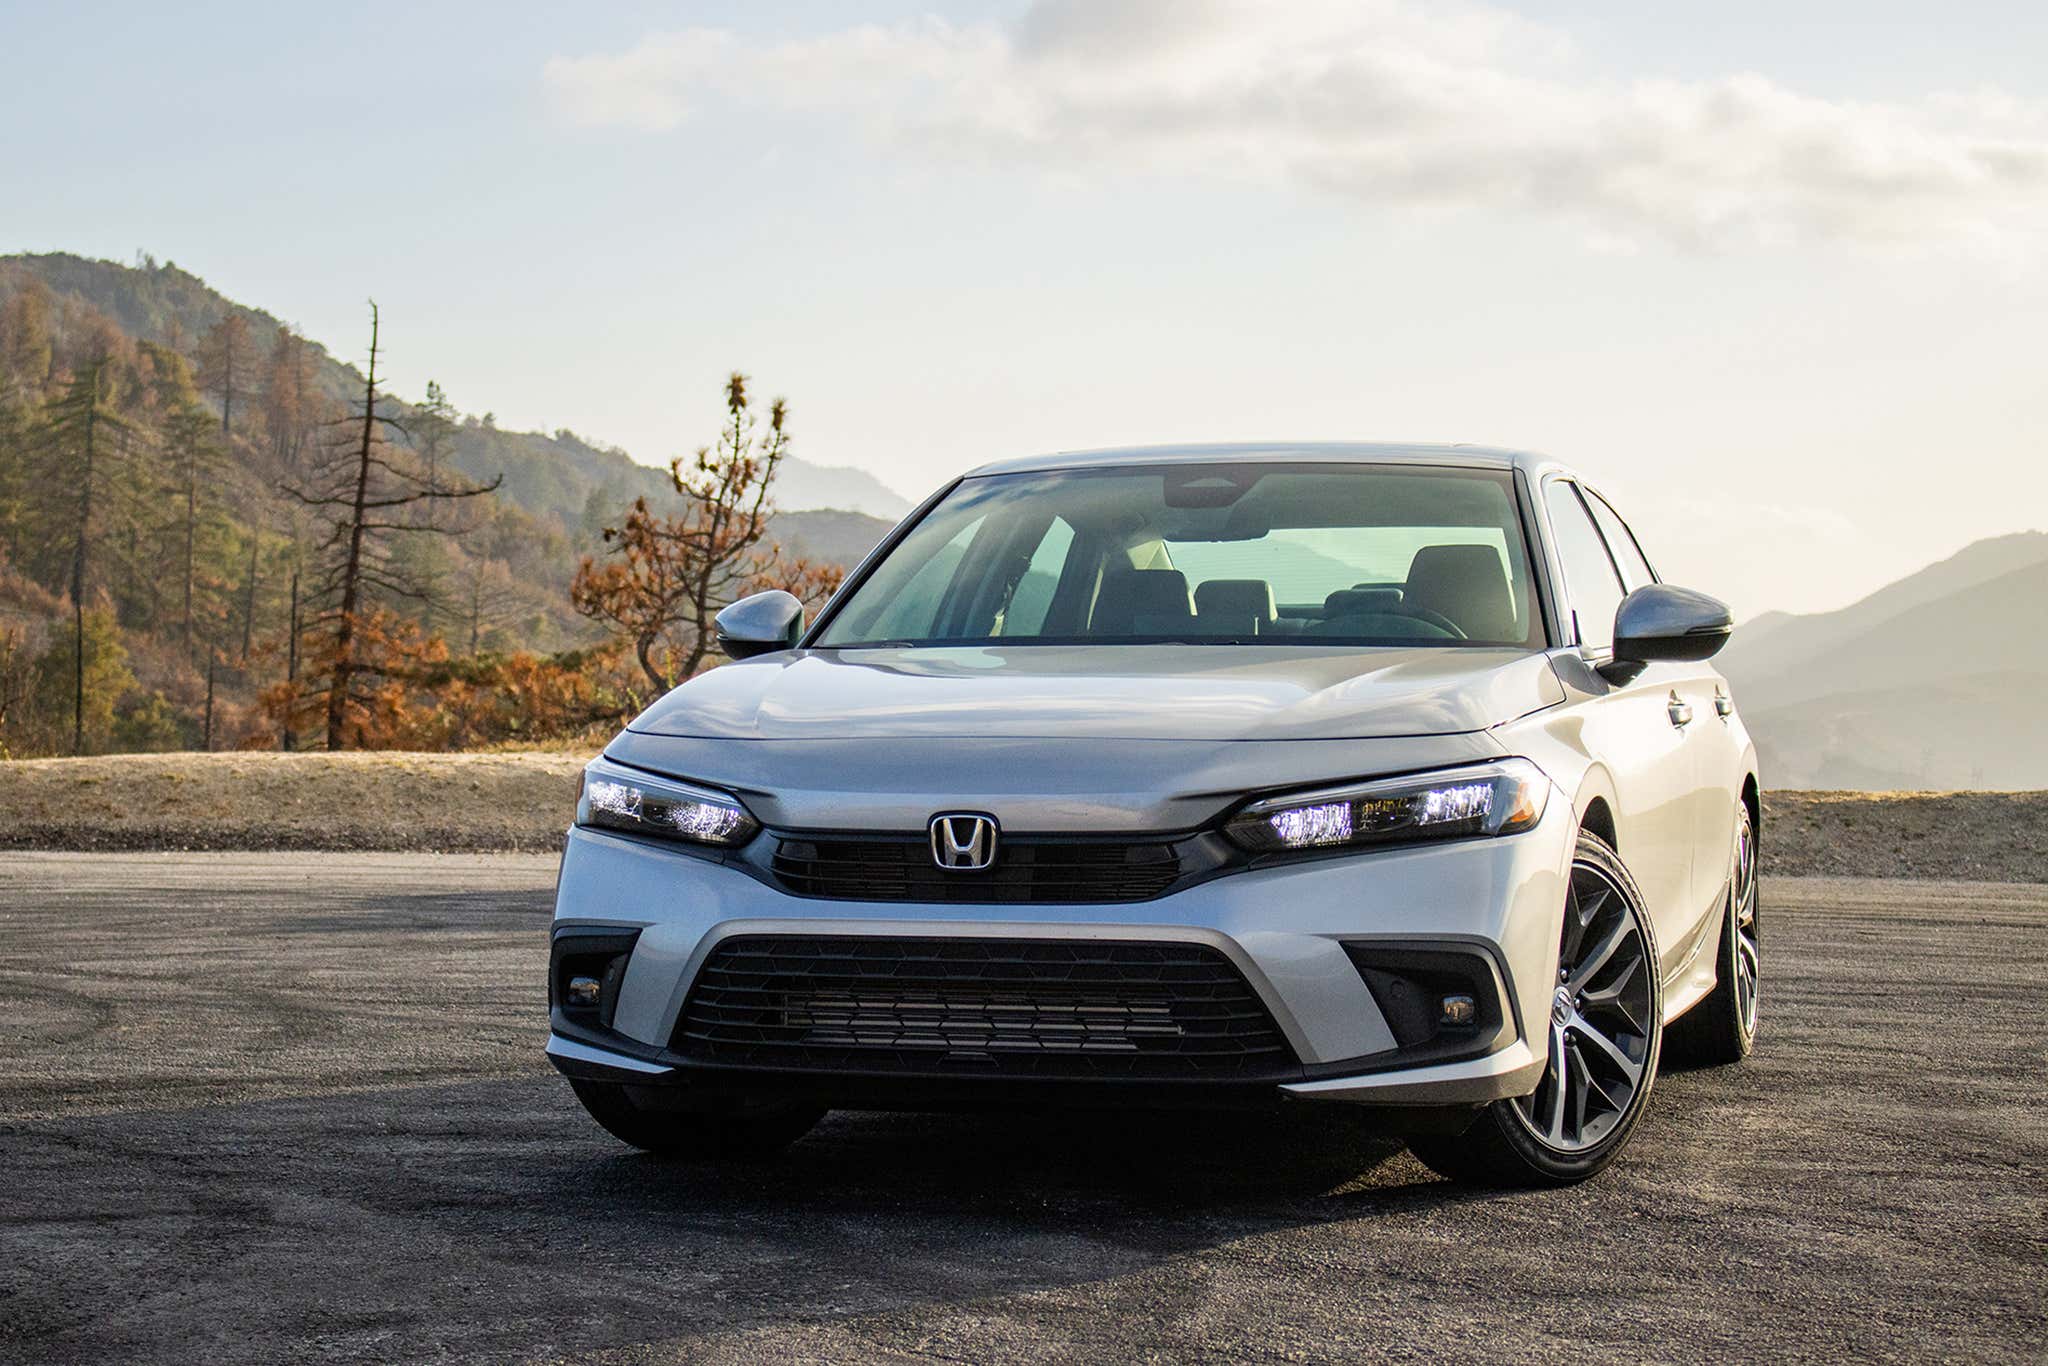 2022 Honda Civic Review: The King of Compacts Reaffirms Its Reign